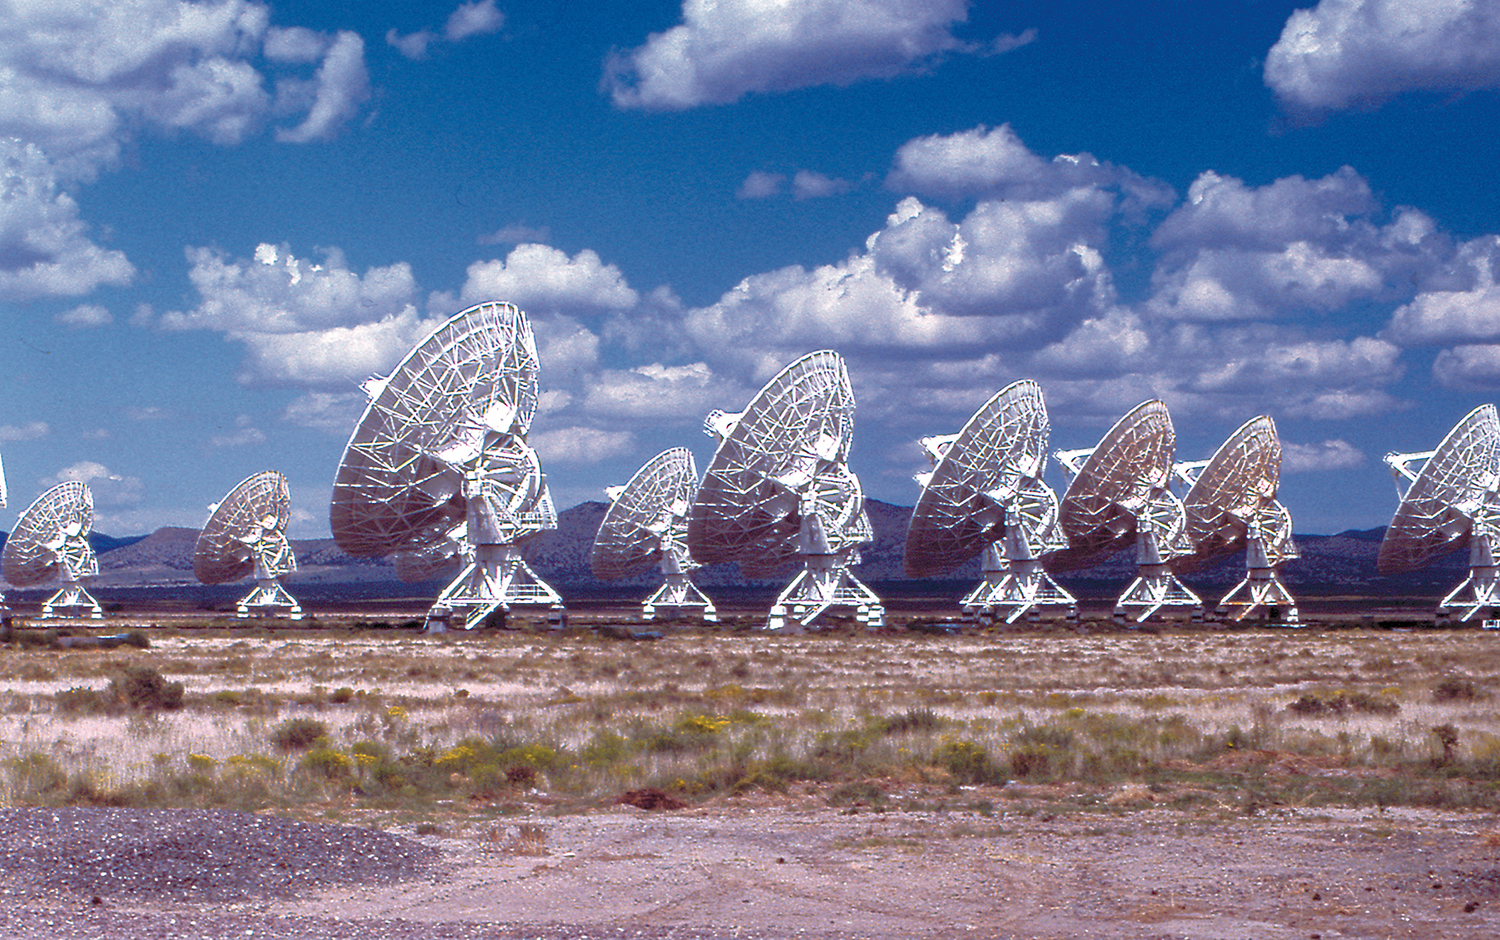 The Very Large Array radio telescope observatory, New Mexico, U.S.A. Radio telescopes enable study of dense interstellar clouds where stars and their planets form. (Image Credit:  NRAO/AUI/NSF)